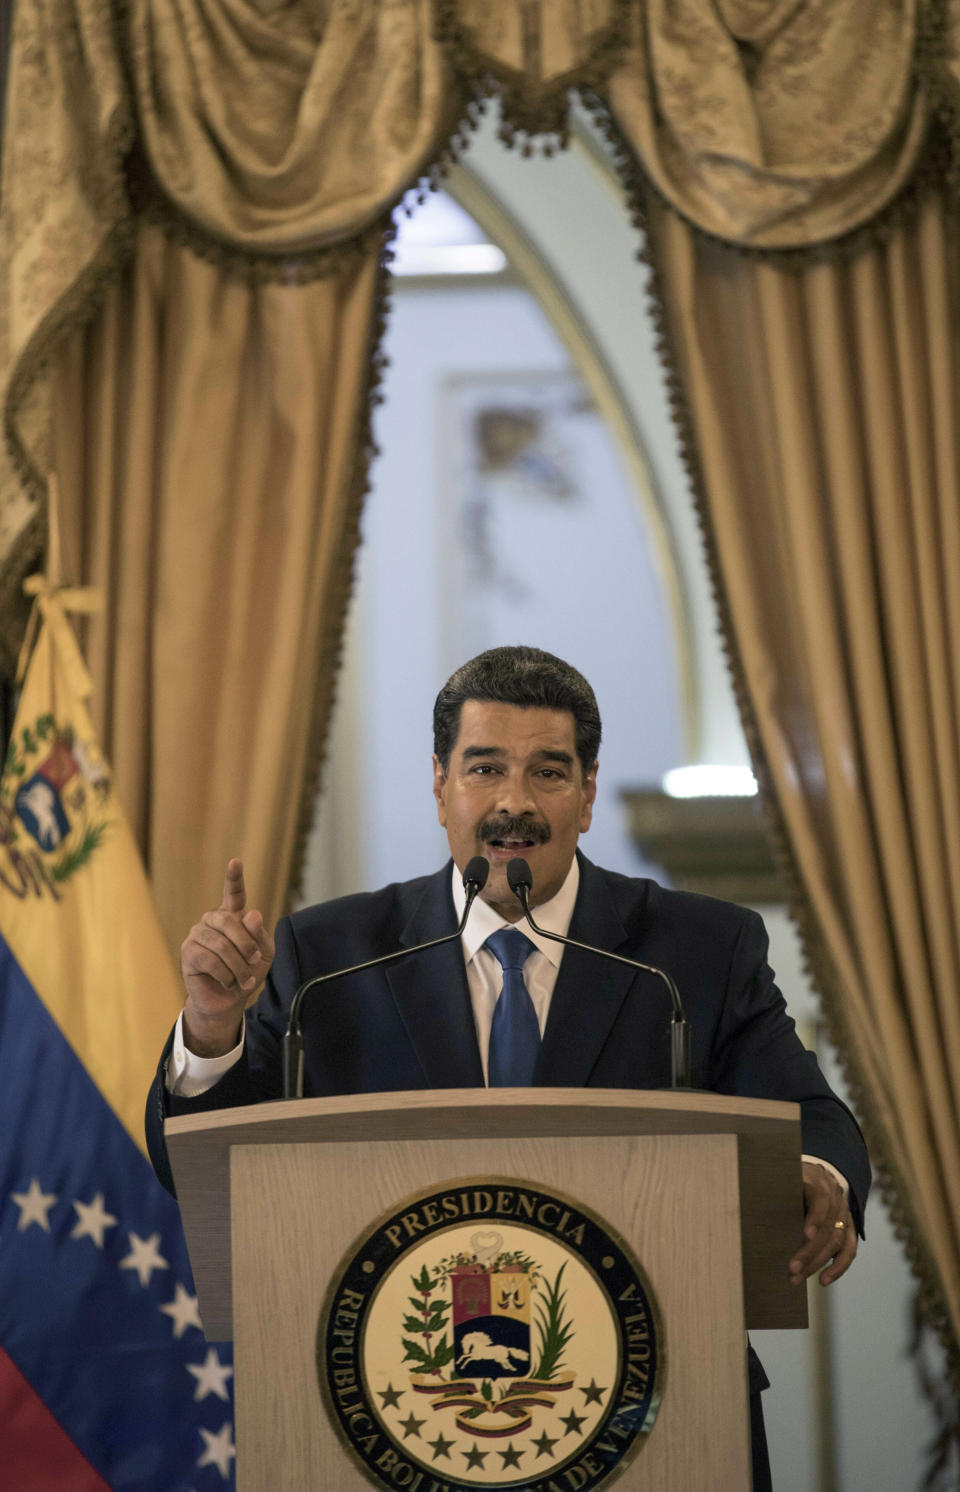 Venezuela's President Nicolas Maduro talks during a press conference at Miraflore's Presidential Palace in Caracas, Venezuela, Friday, Feb. 8, 2019. U.S. humanitarian aid destined for Venezuela was being prepared at a warehouse on the Colombian border Friday, as opposition leader Juan Guaido assured his desperate countrymen that supplies would reach them despite objections from embattled President Nicolas Maduro. (AP Photo/Rodrigo Abd)